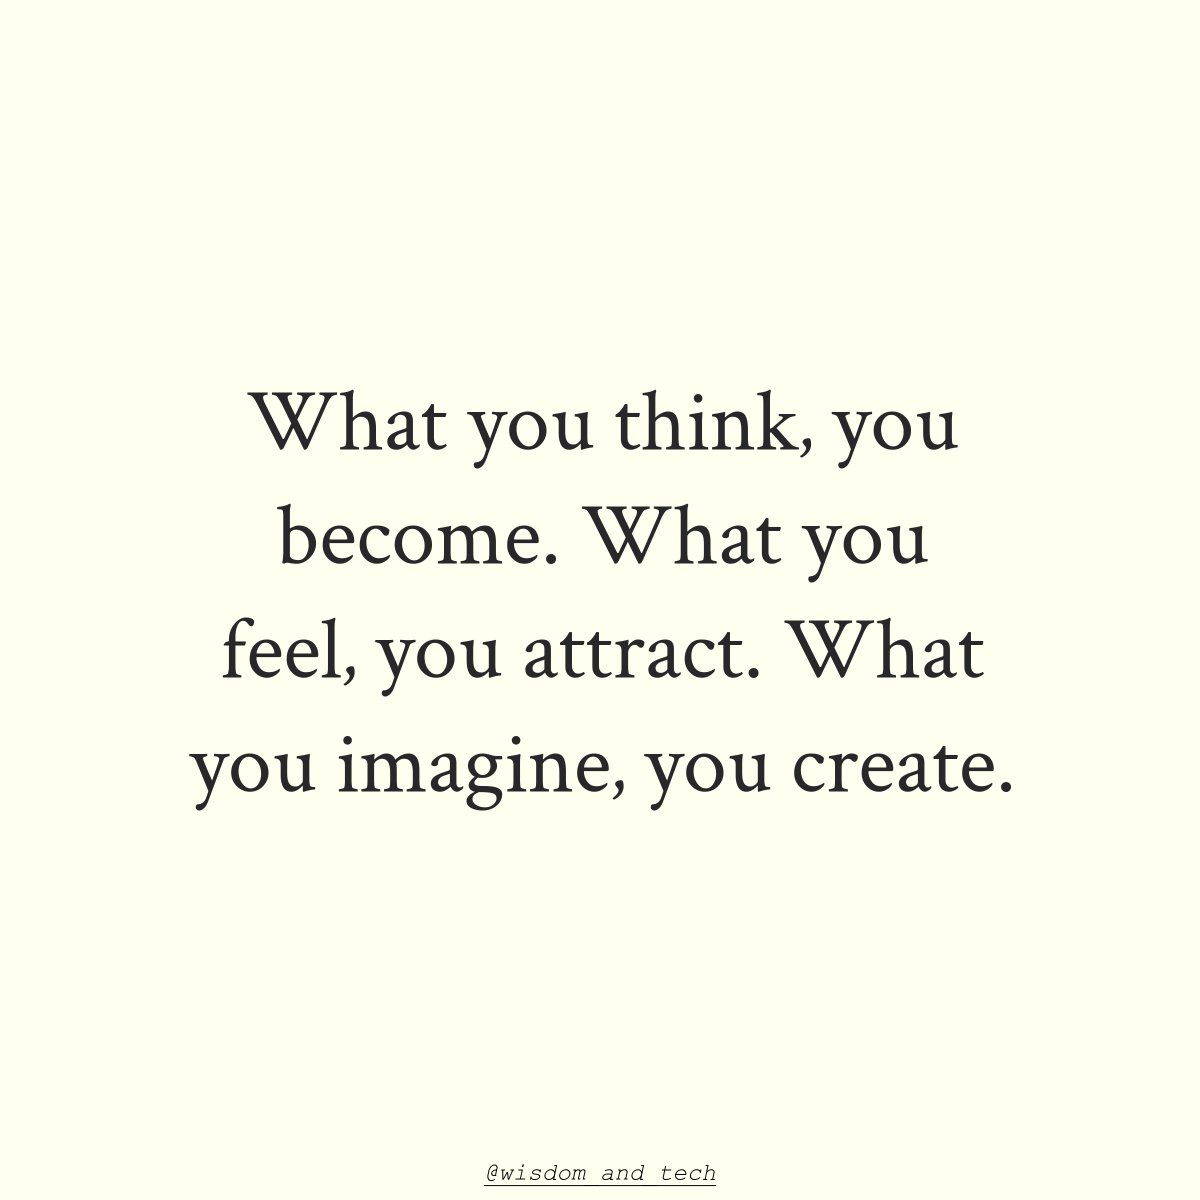 What are you thinking, feeling, and imagining today? 🤔
#MindsetMatters #ConsciousCreation #LawOfAttraction